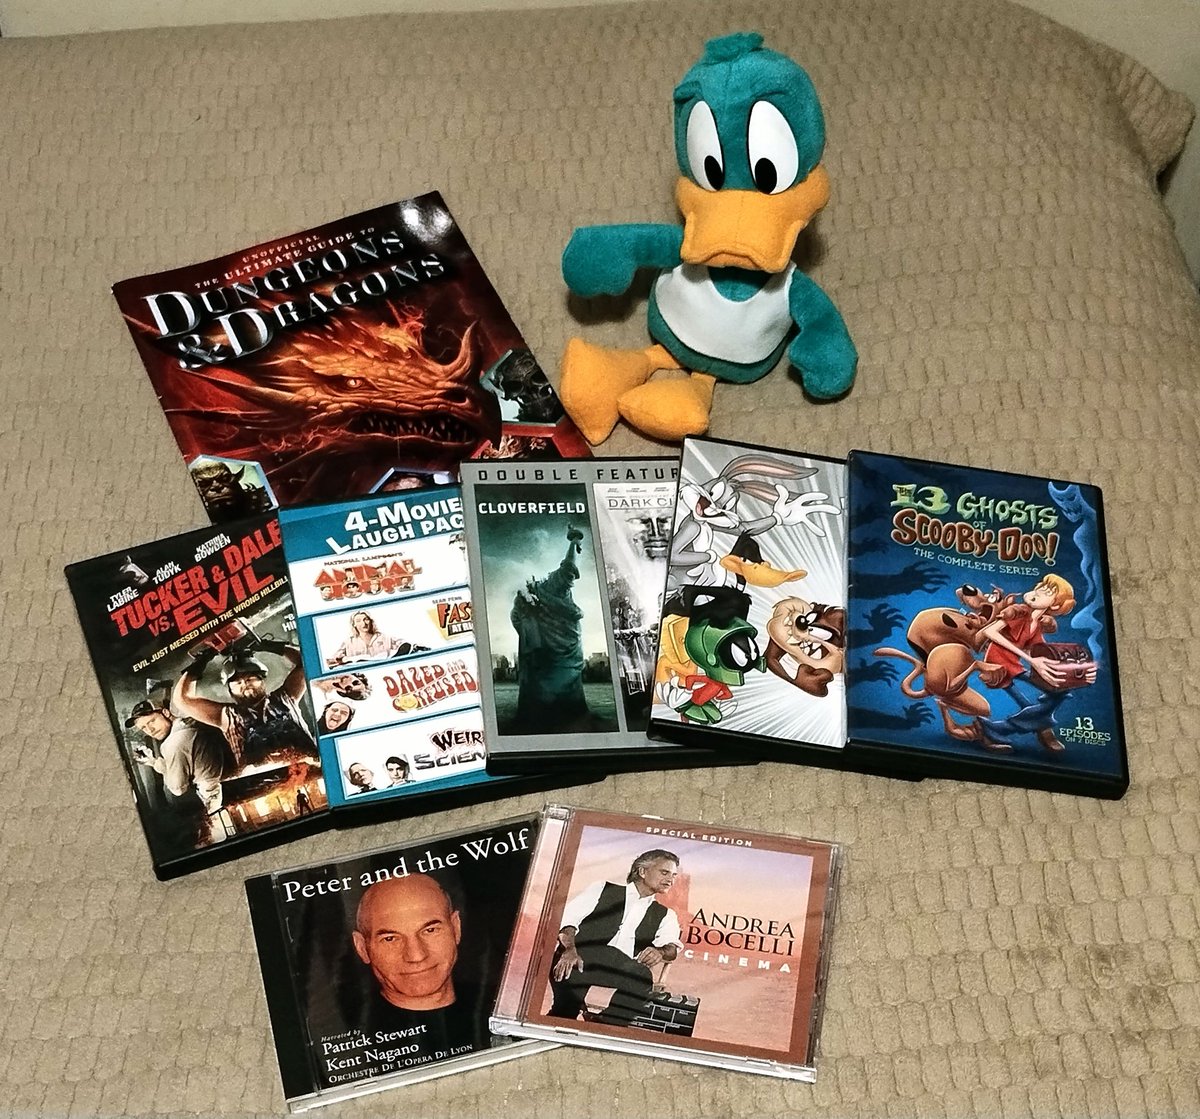 Checked out the new thrift store in my neck of the woods earlier today (nice little place). Found a couple of pop culture gems there - including a Plucky Duck plushie! 🎥💿🦆😃 #thriftstorefinds #creativefuel #physicalmediaforever #PluckyDuck #ahhmangojuice #TreatYoSelf